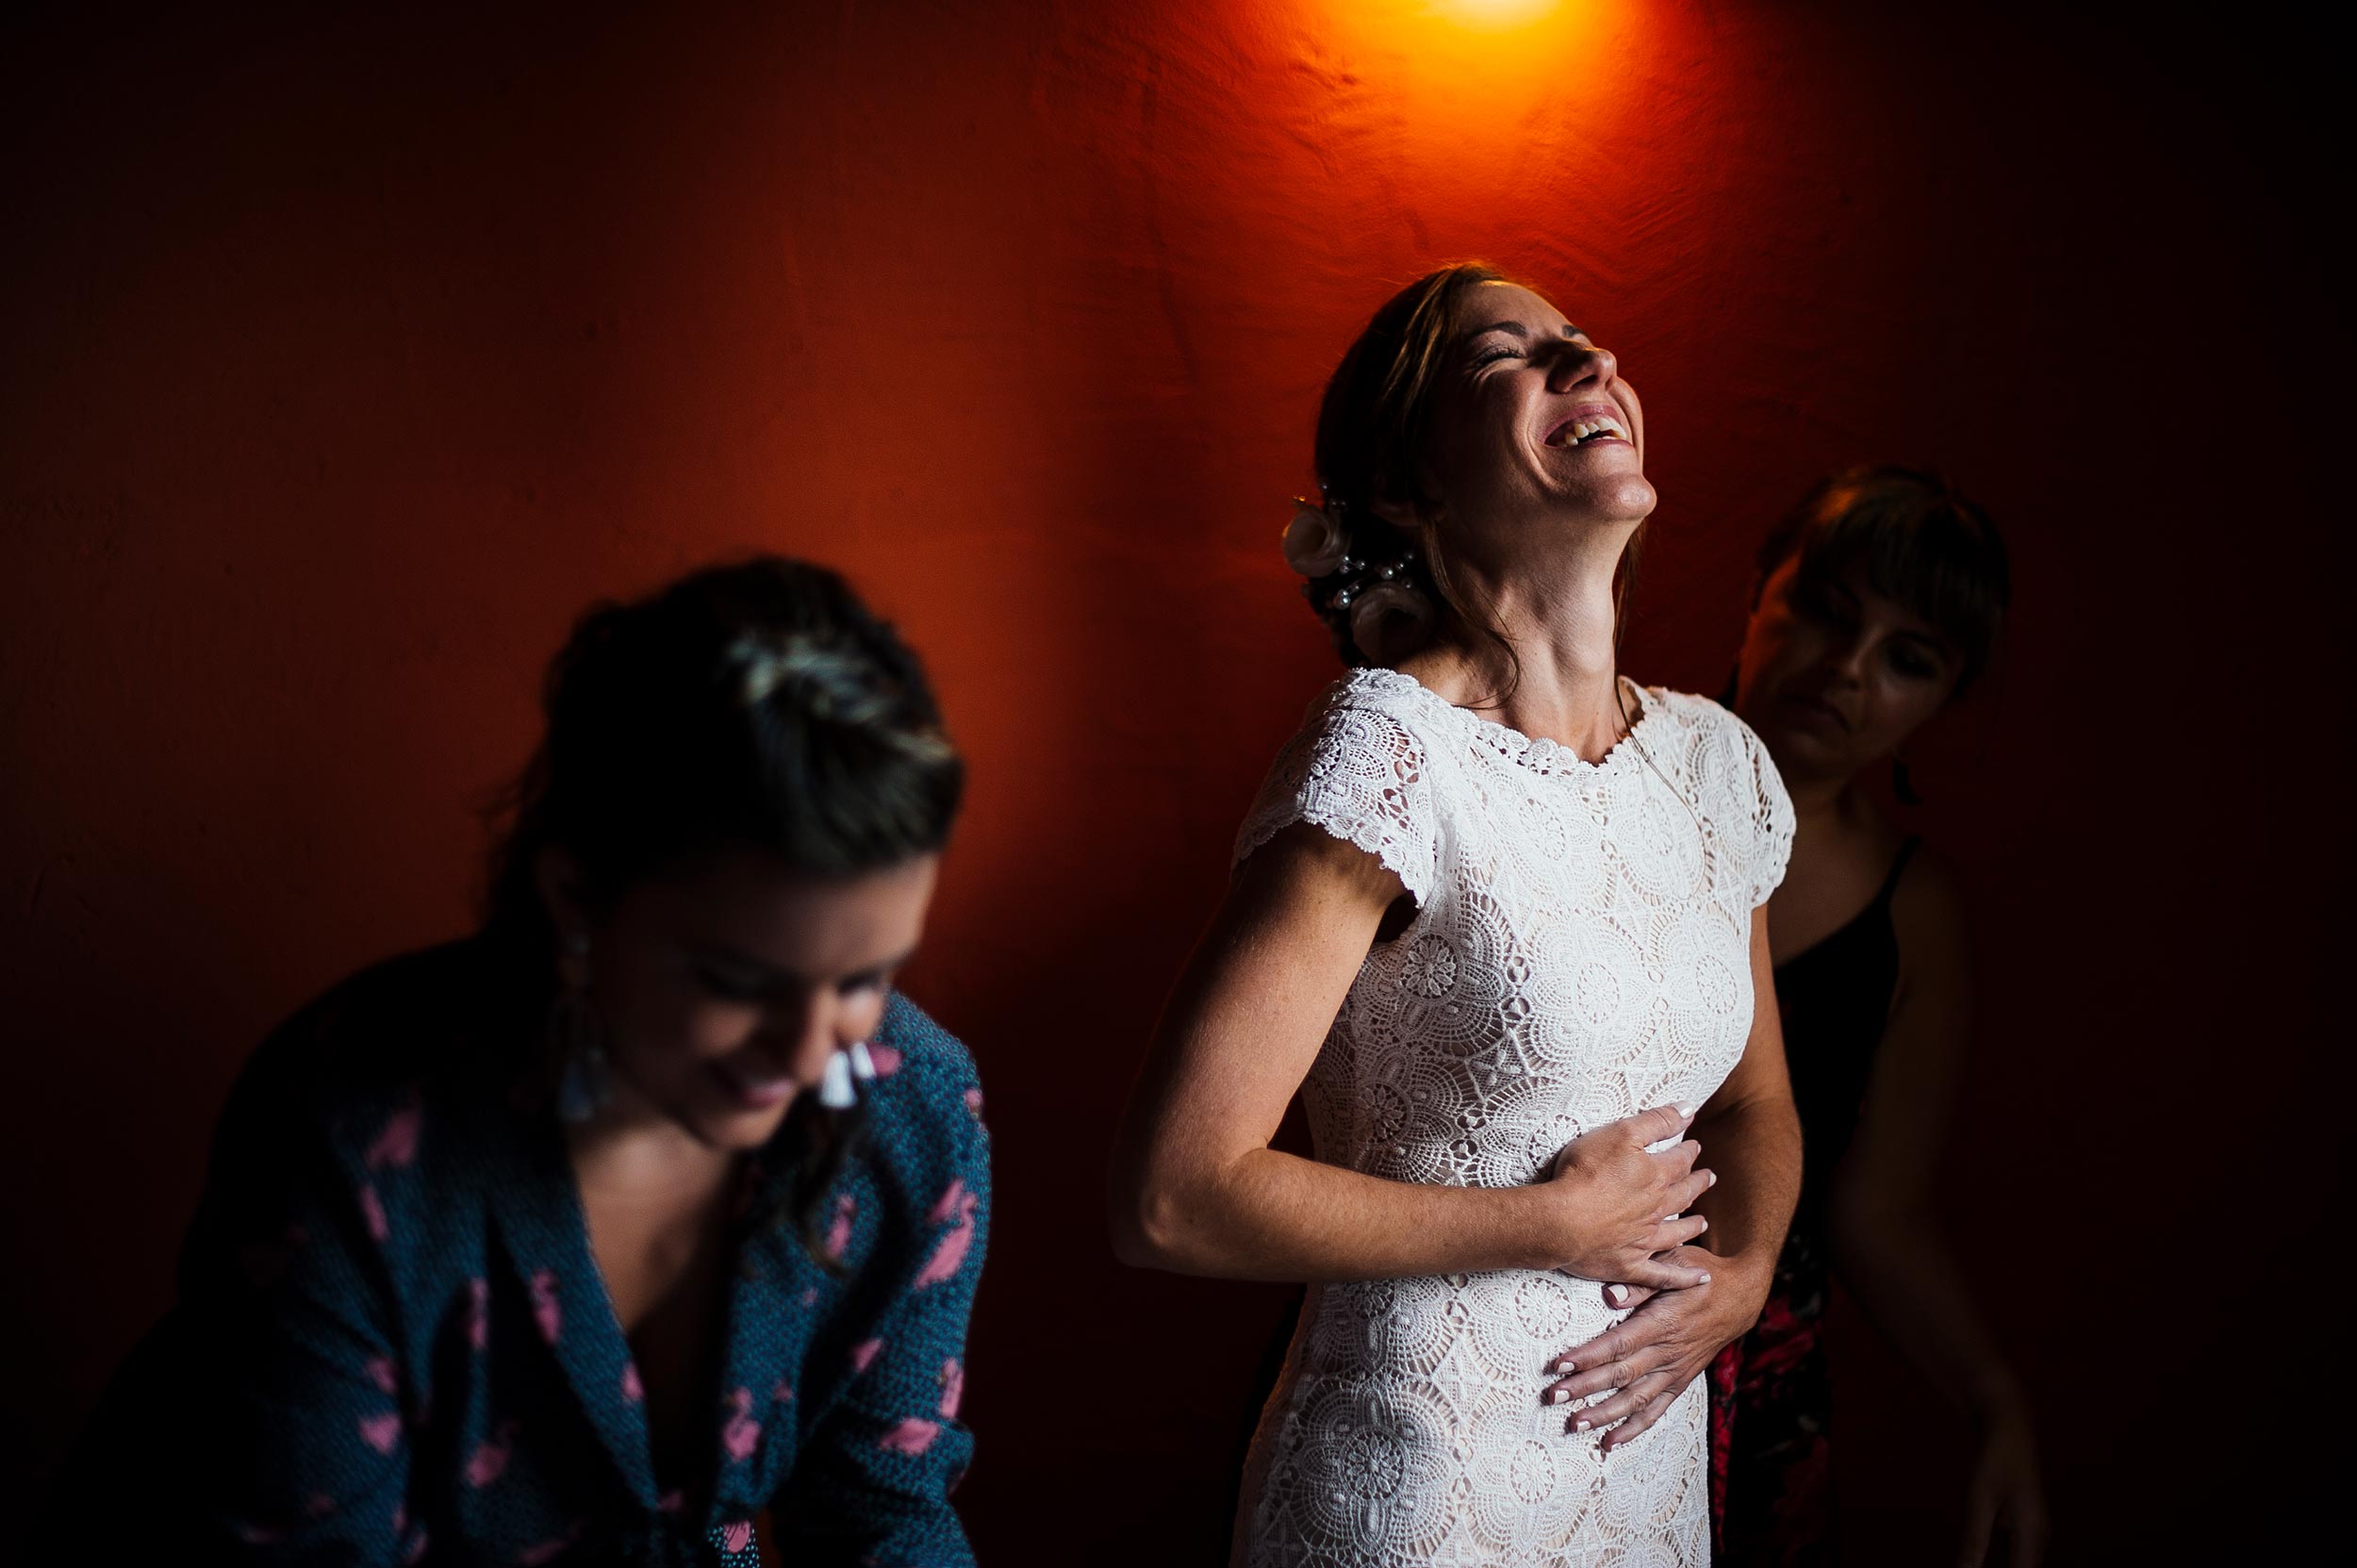 bride-getting-ready-against-red-wall-italian-wedding-reportage-by-Alessandro-Avenali.jpg